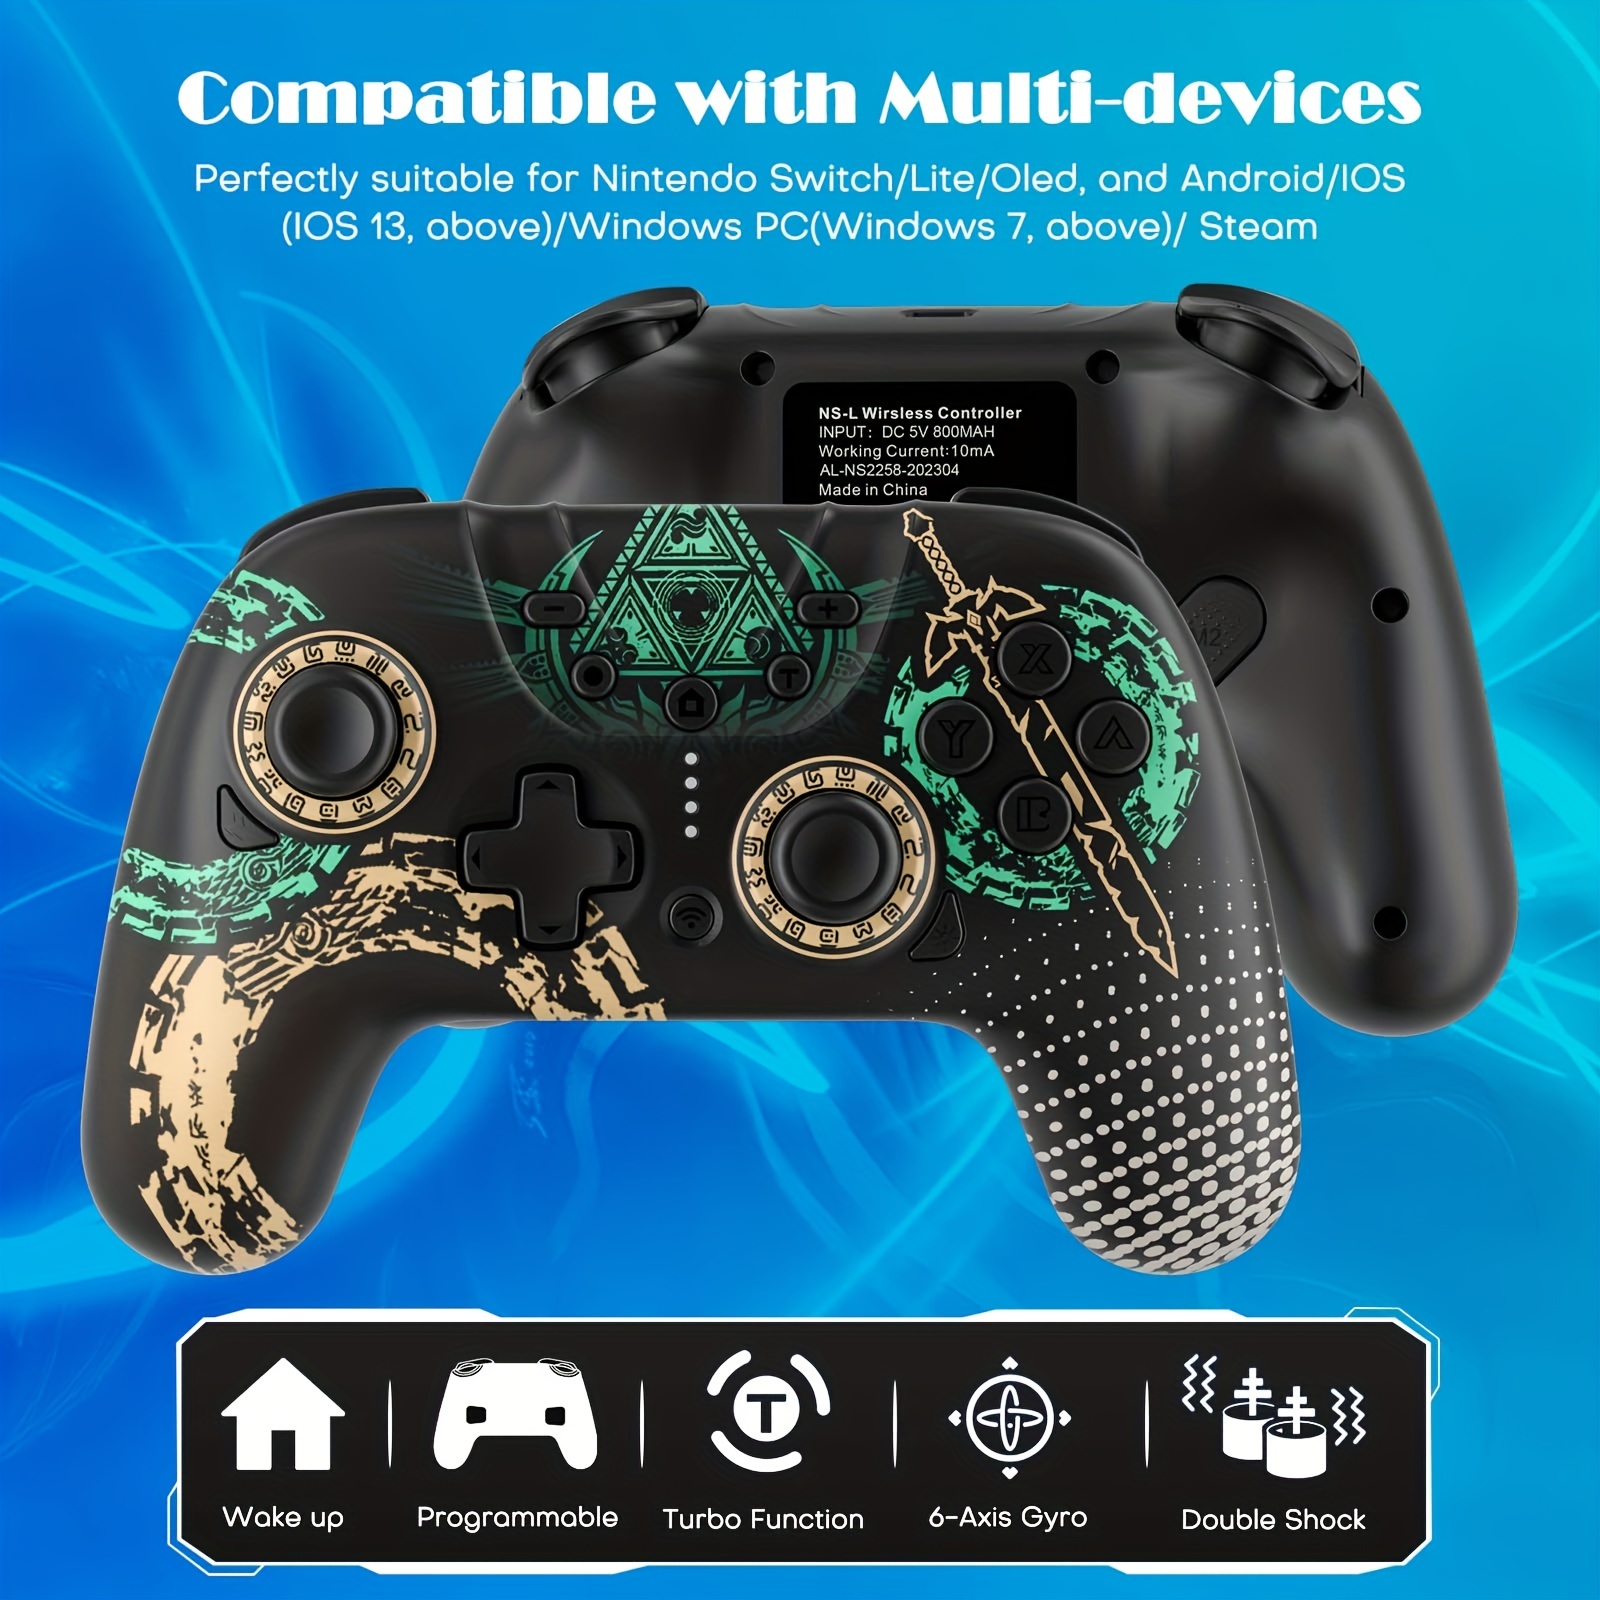  Nintendo Switch Pro Controller : Video Games